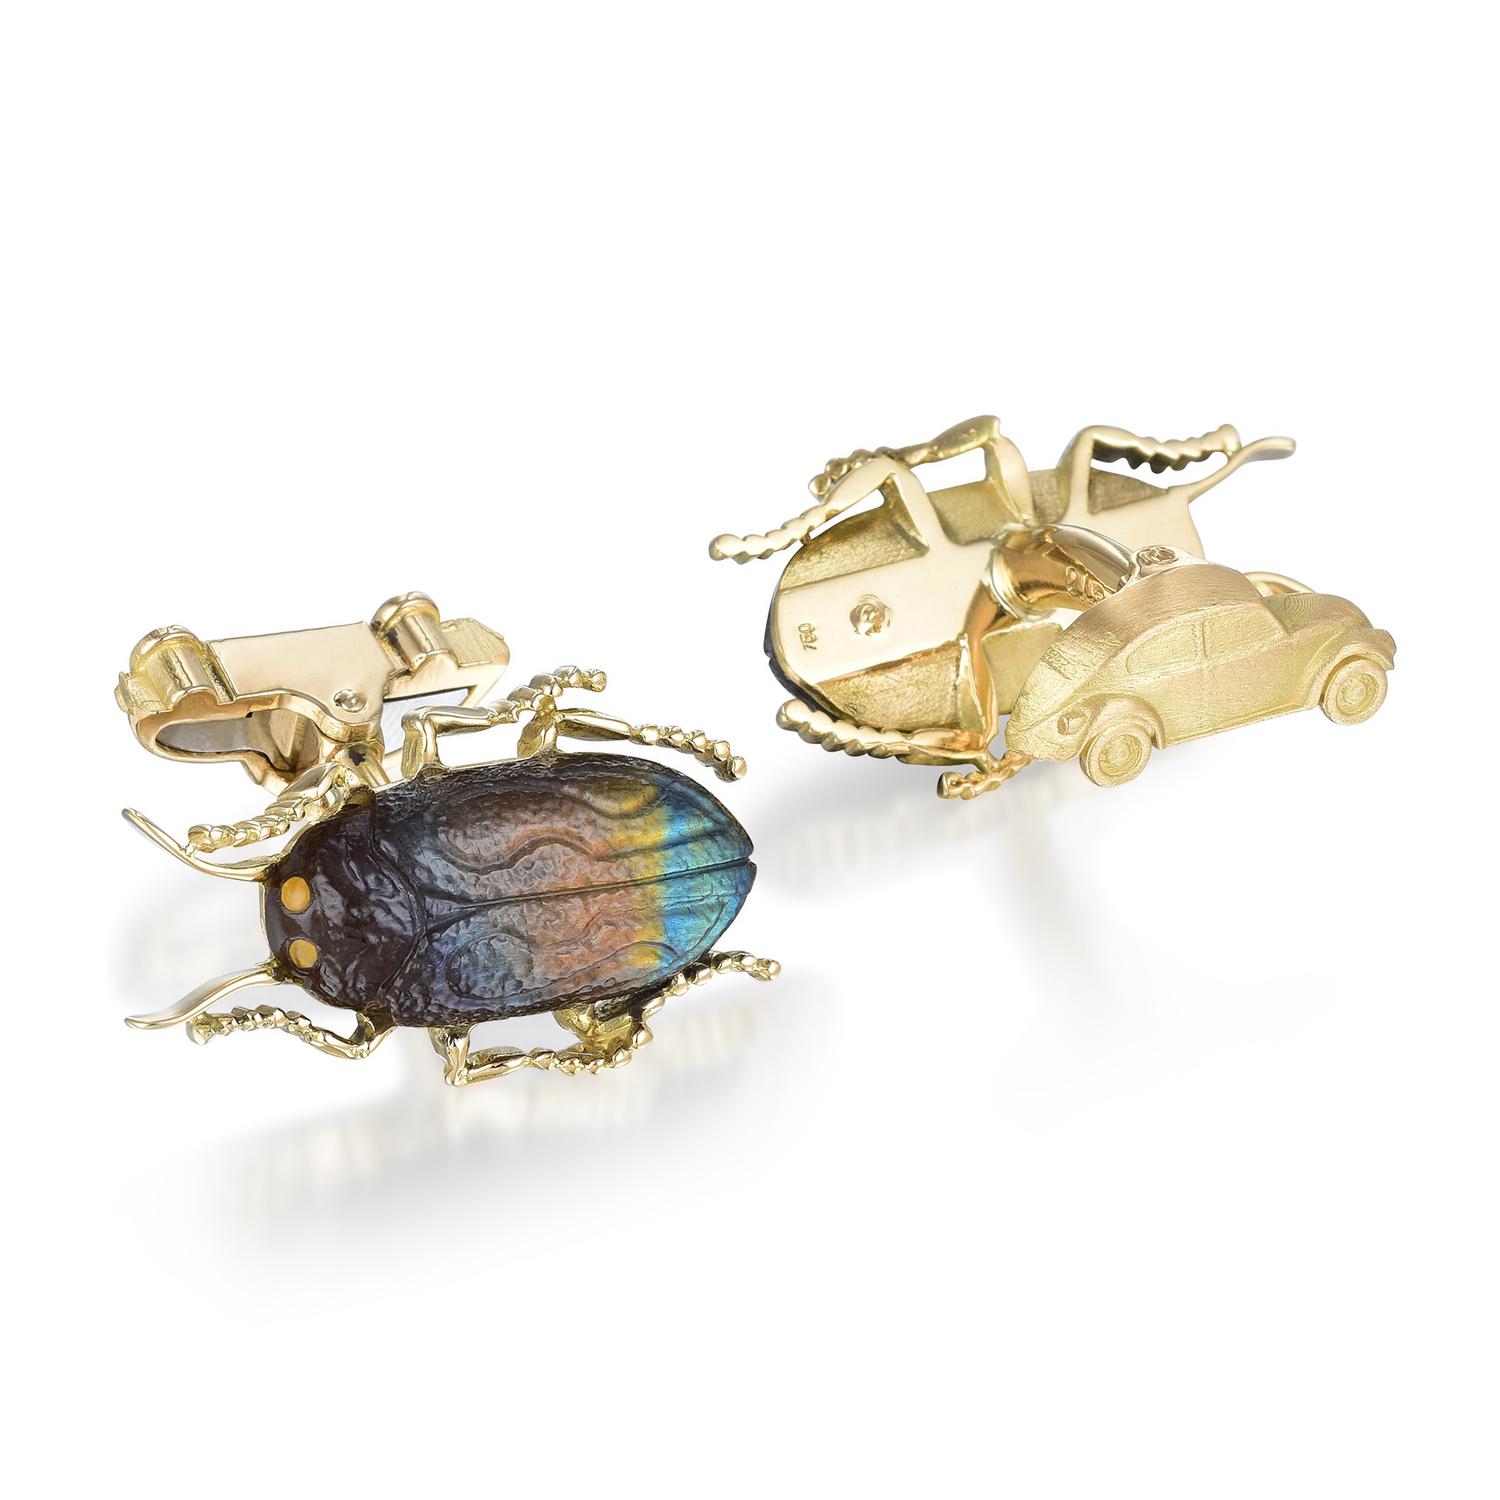 Contemporary Michael Kanners Jewel Beetle Cufflinks For Sale